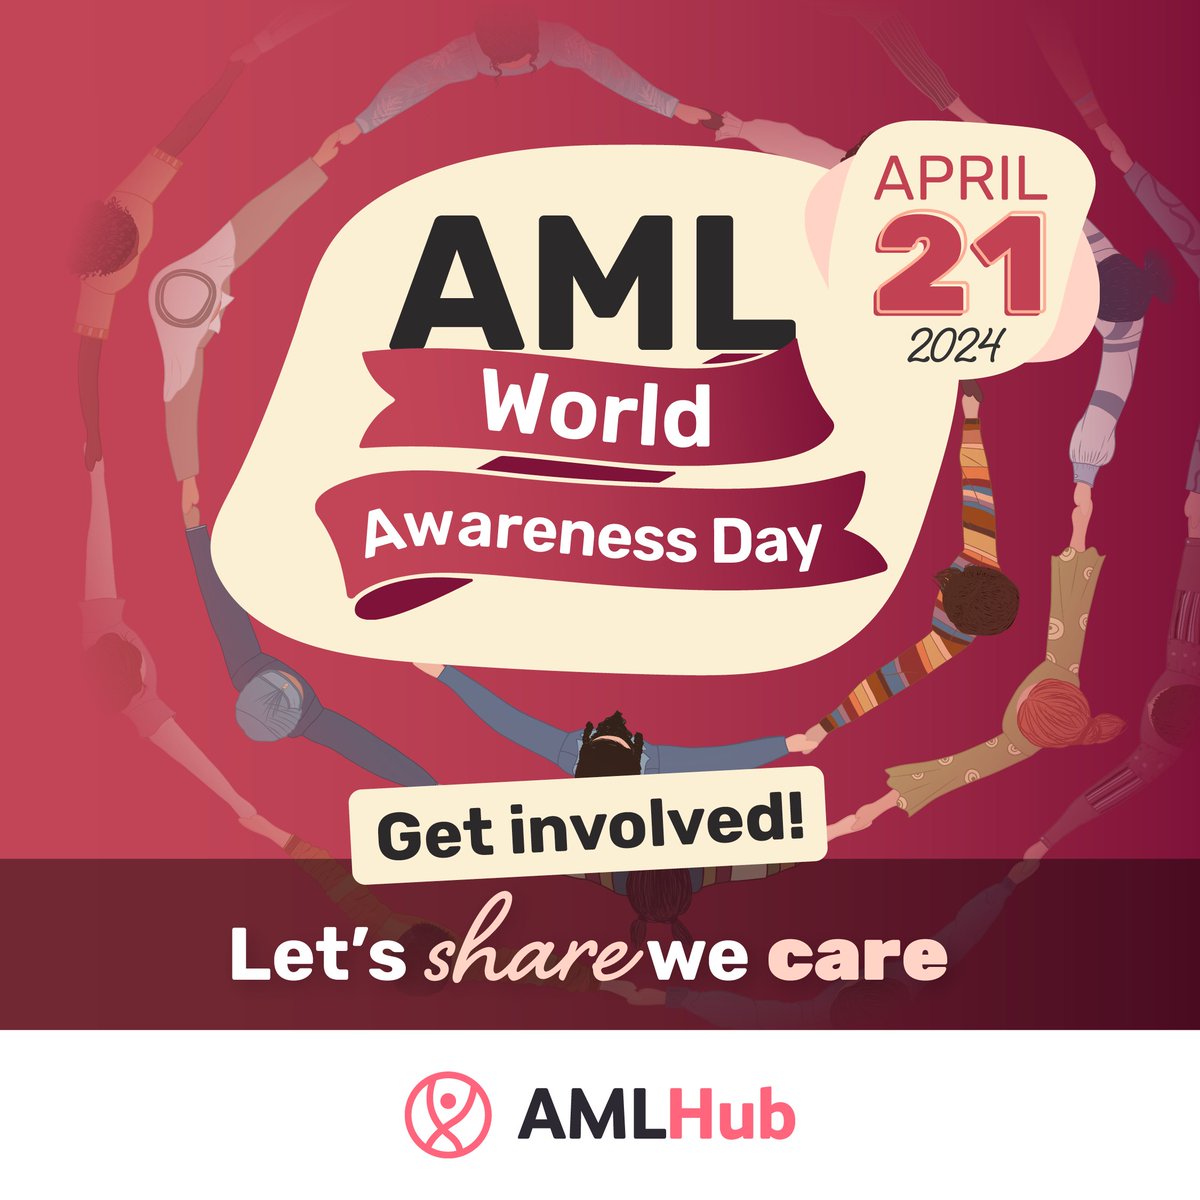 📢 April 21 is #AMLWorldAwarenessDay! 📢 Let us unite and raise awareness of #AcuteMyeloidLeukemia! 🌎 Join the collective voice advocating for patients with this cancer. To learn how to get involved, visit: loom.ly/AkyDt8s #KnowAML